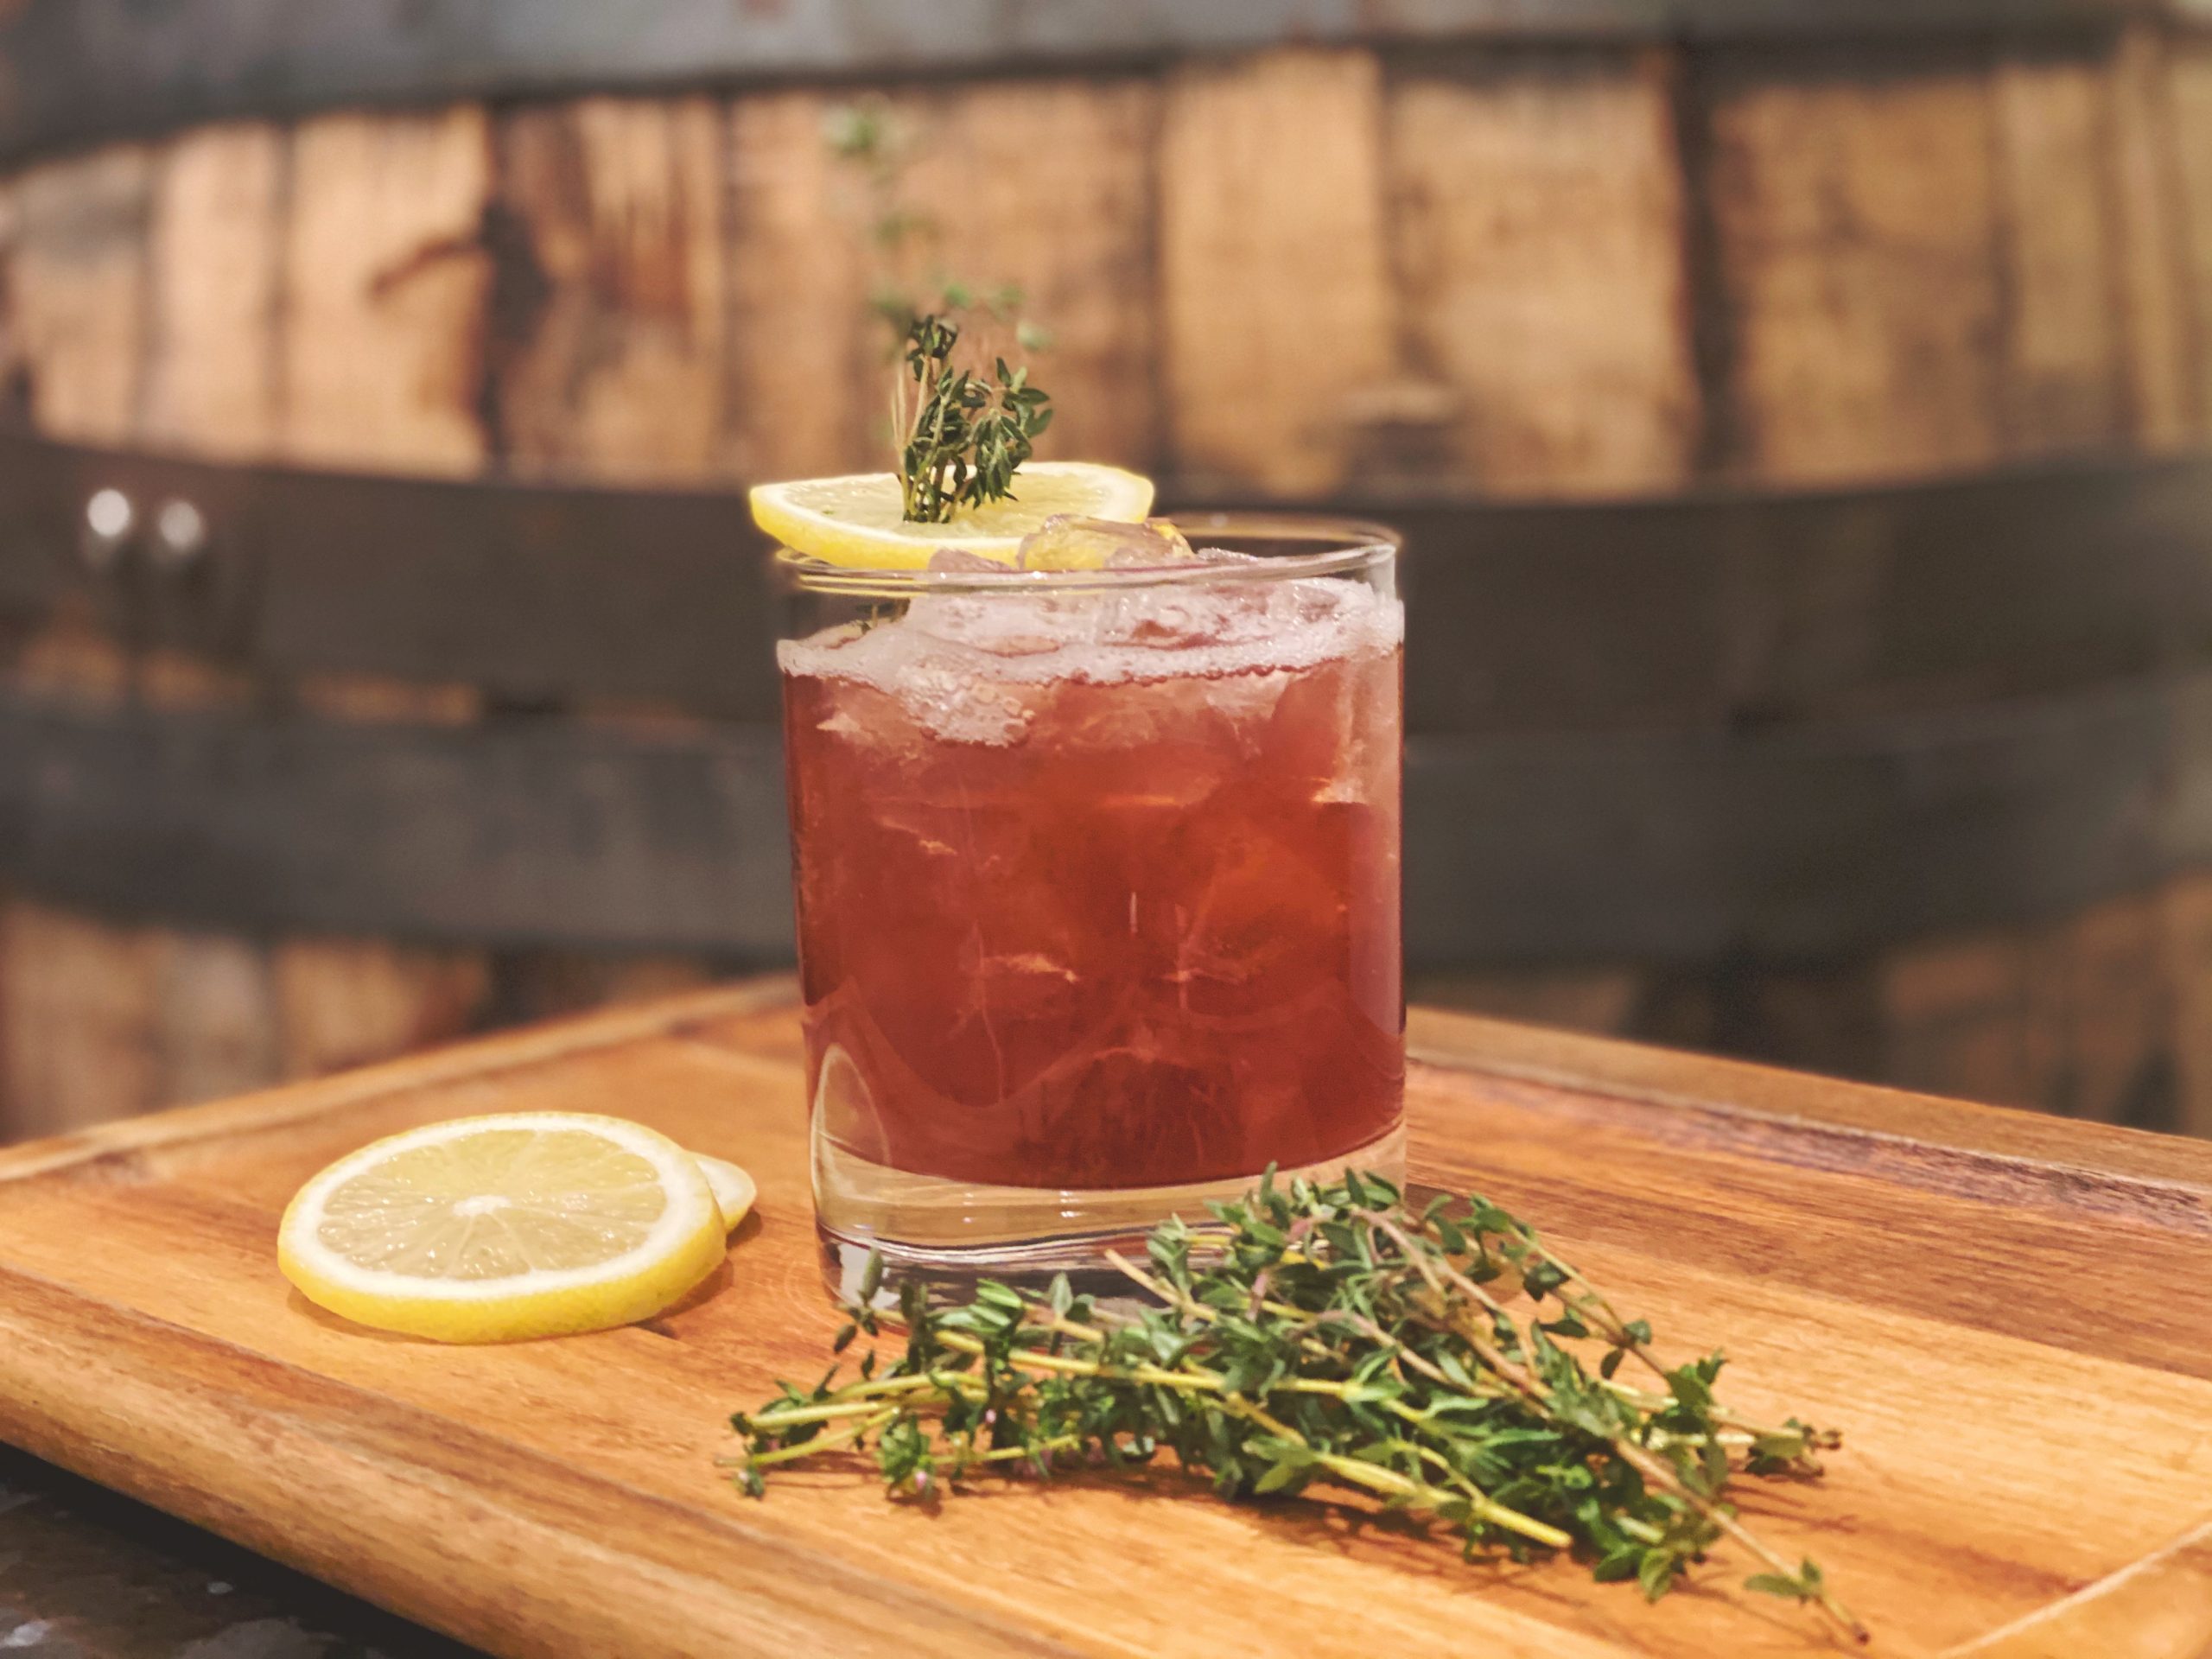 Spring Cocktail Trends